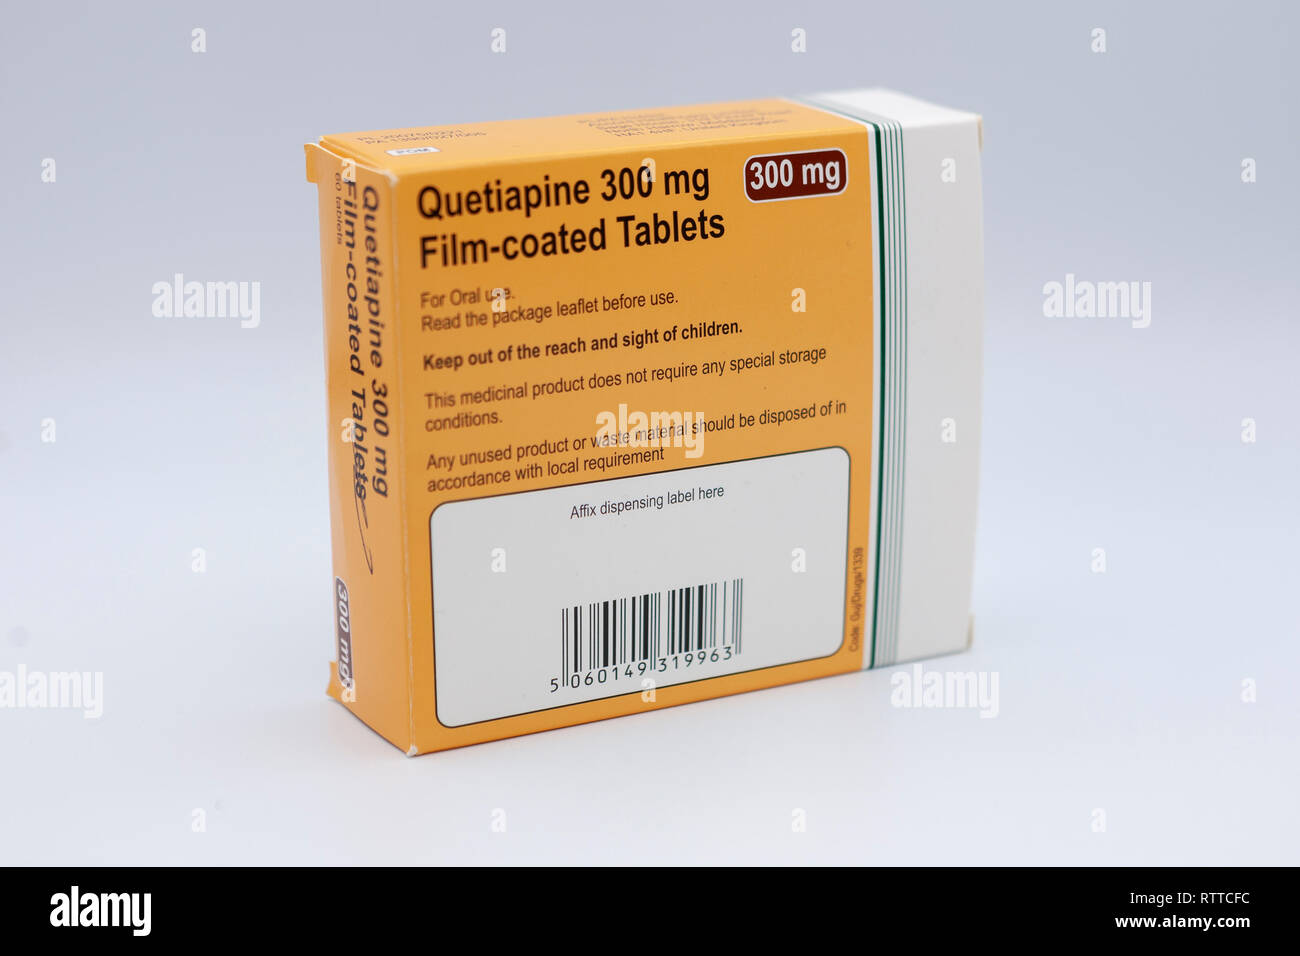 Quetiapine 300 mg Film-coated Tablets. Quetiapine, sold under the trade name Seroquel among others, is an atypical antipsychotic used for the treatmen Stock Photo